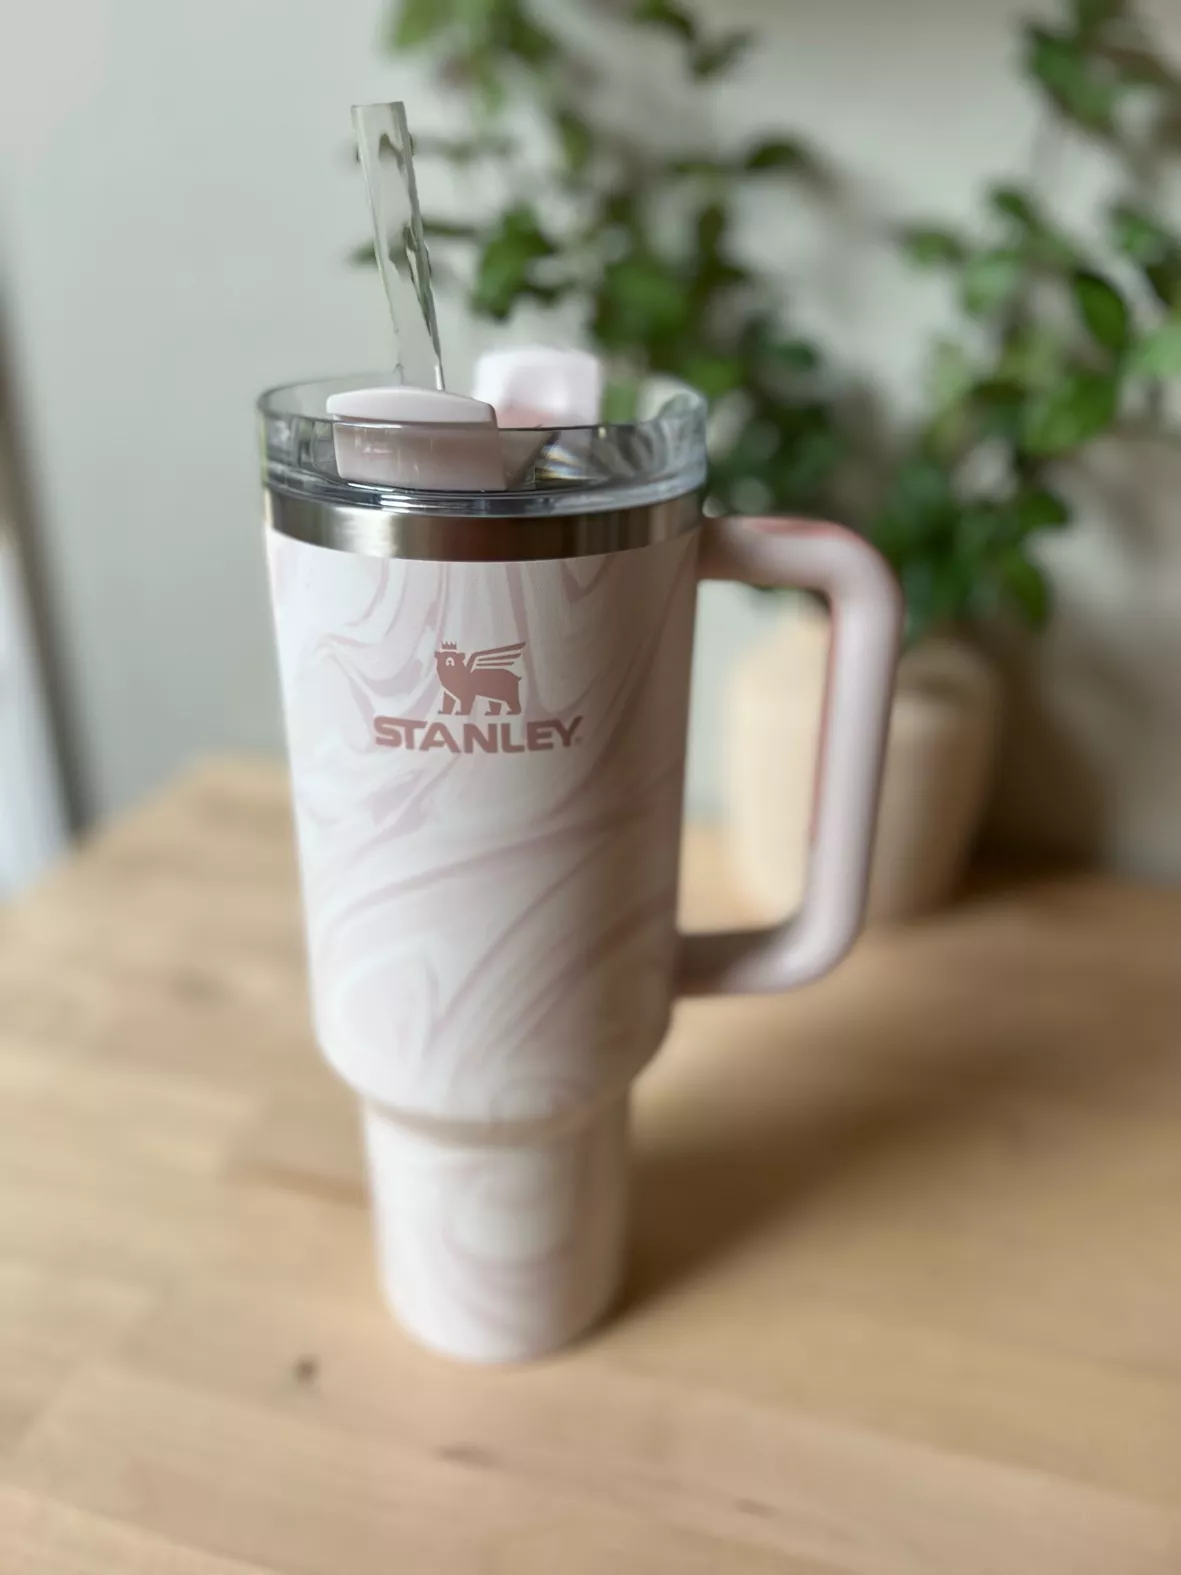 Lainey Wilson Teams Up With Stanley For Another Tumbler Release